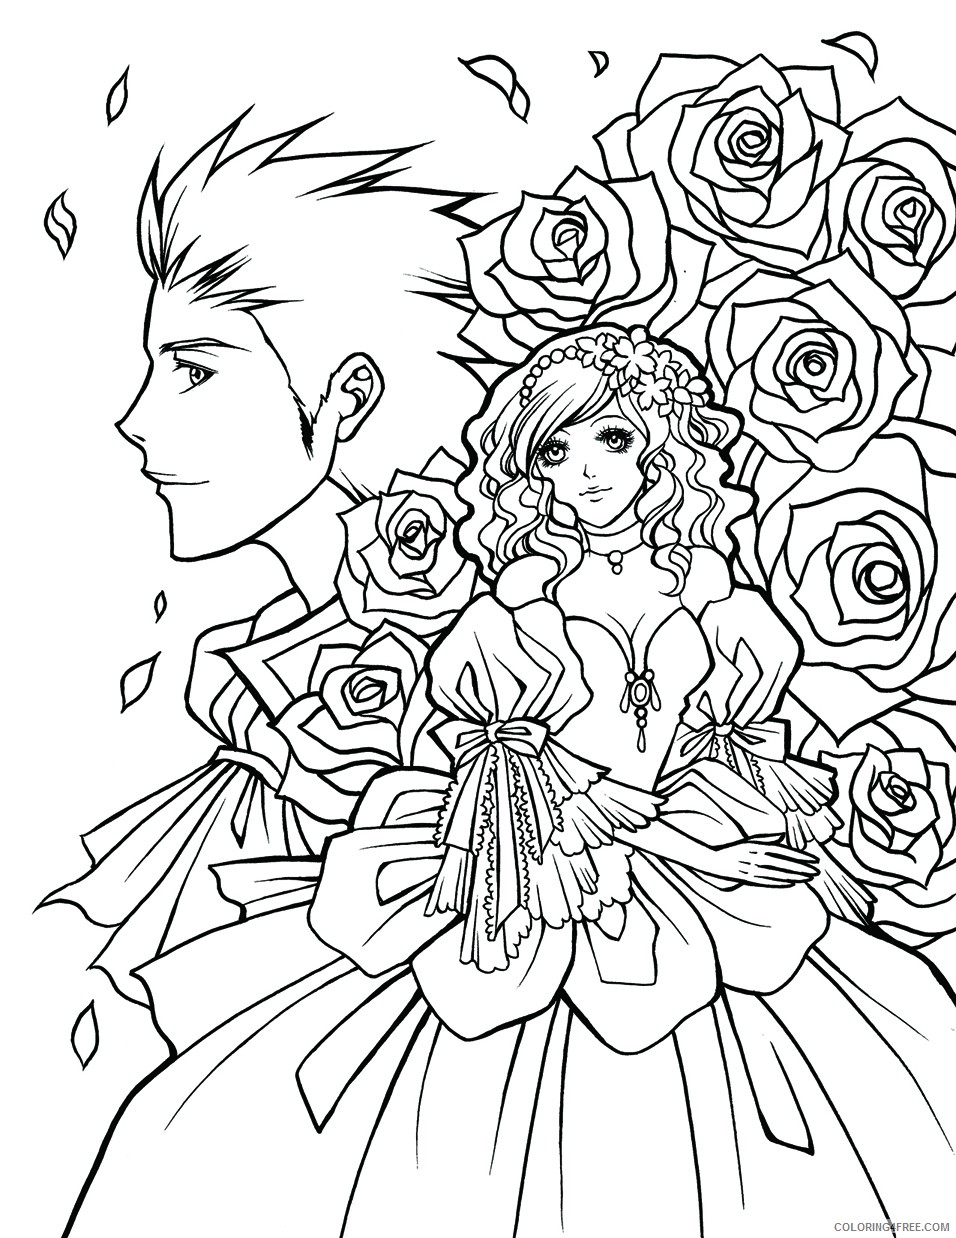 manga coloring pages for adults Coloring4free